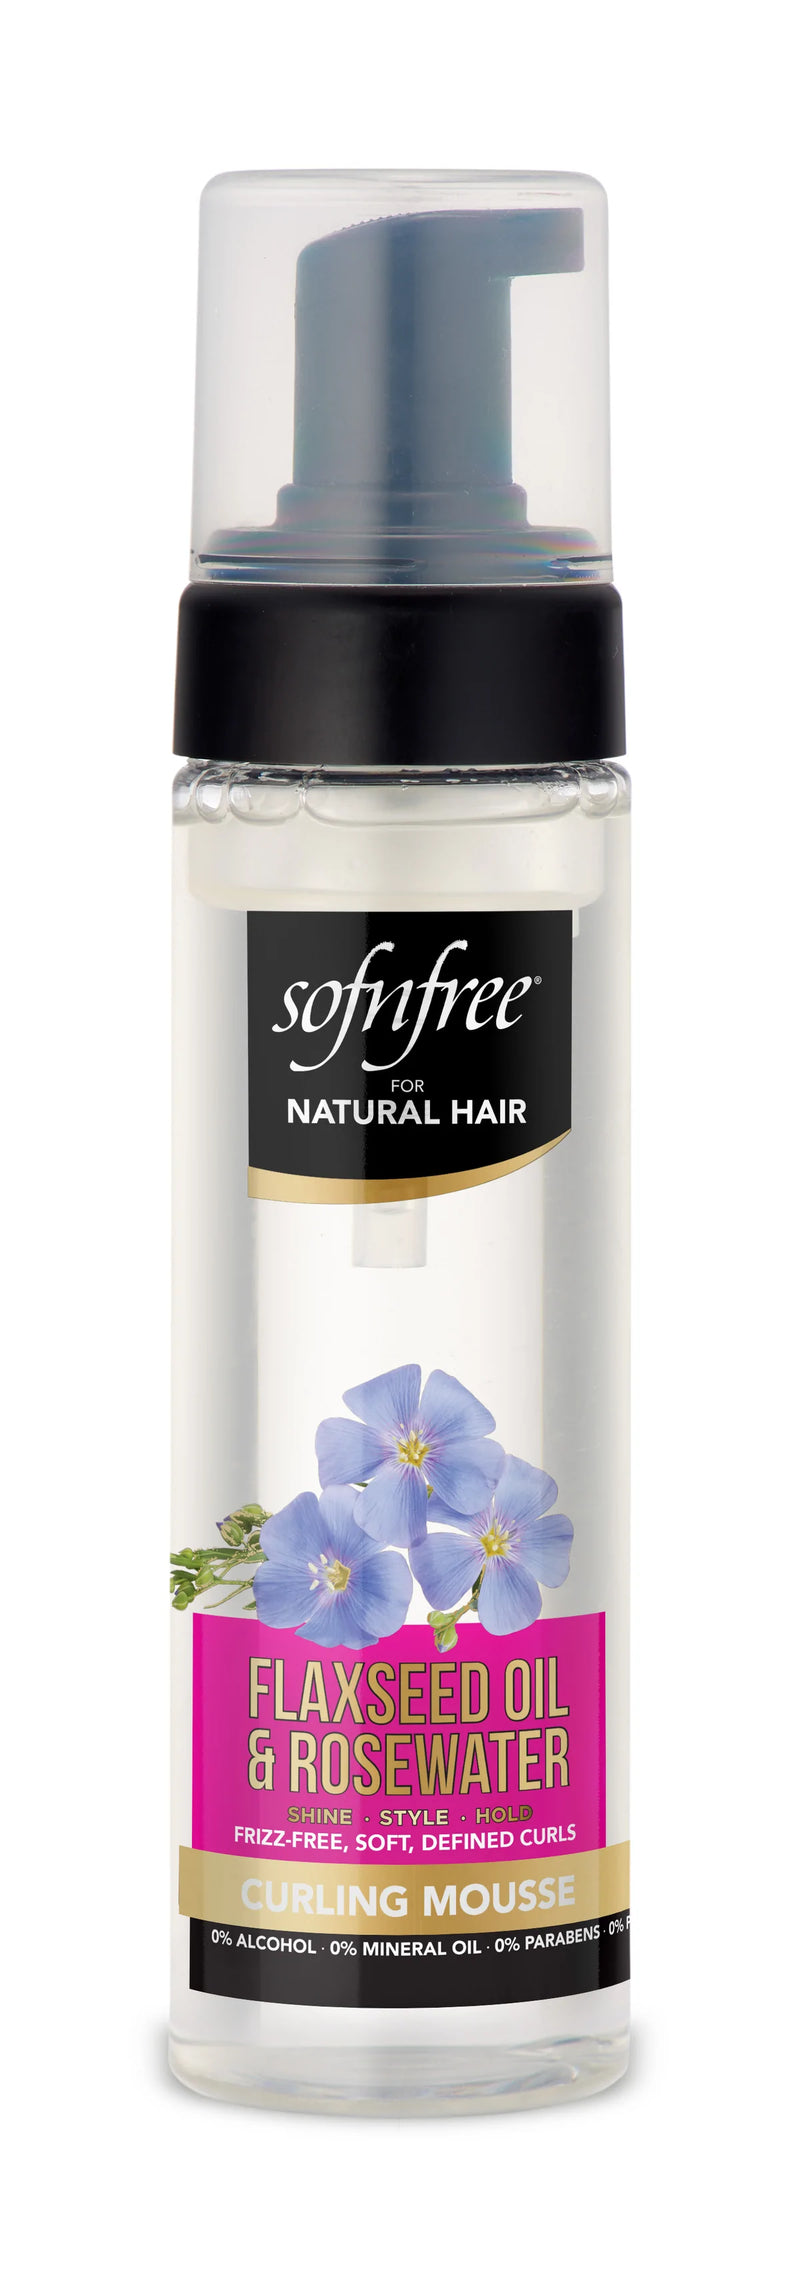 Sofn'free Flaxseed Oil & Rosewater Curling Mousse 200ml sofn'free